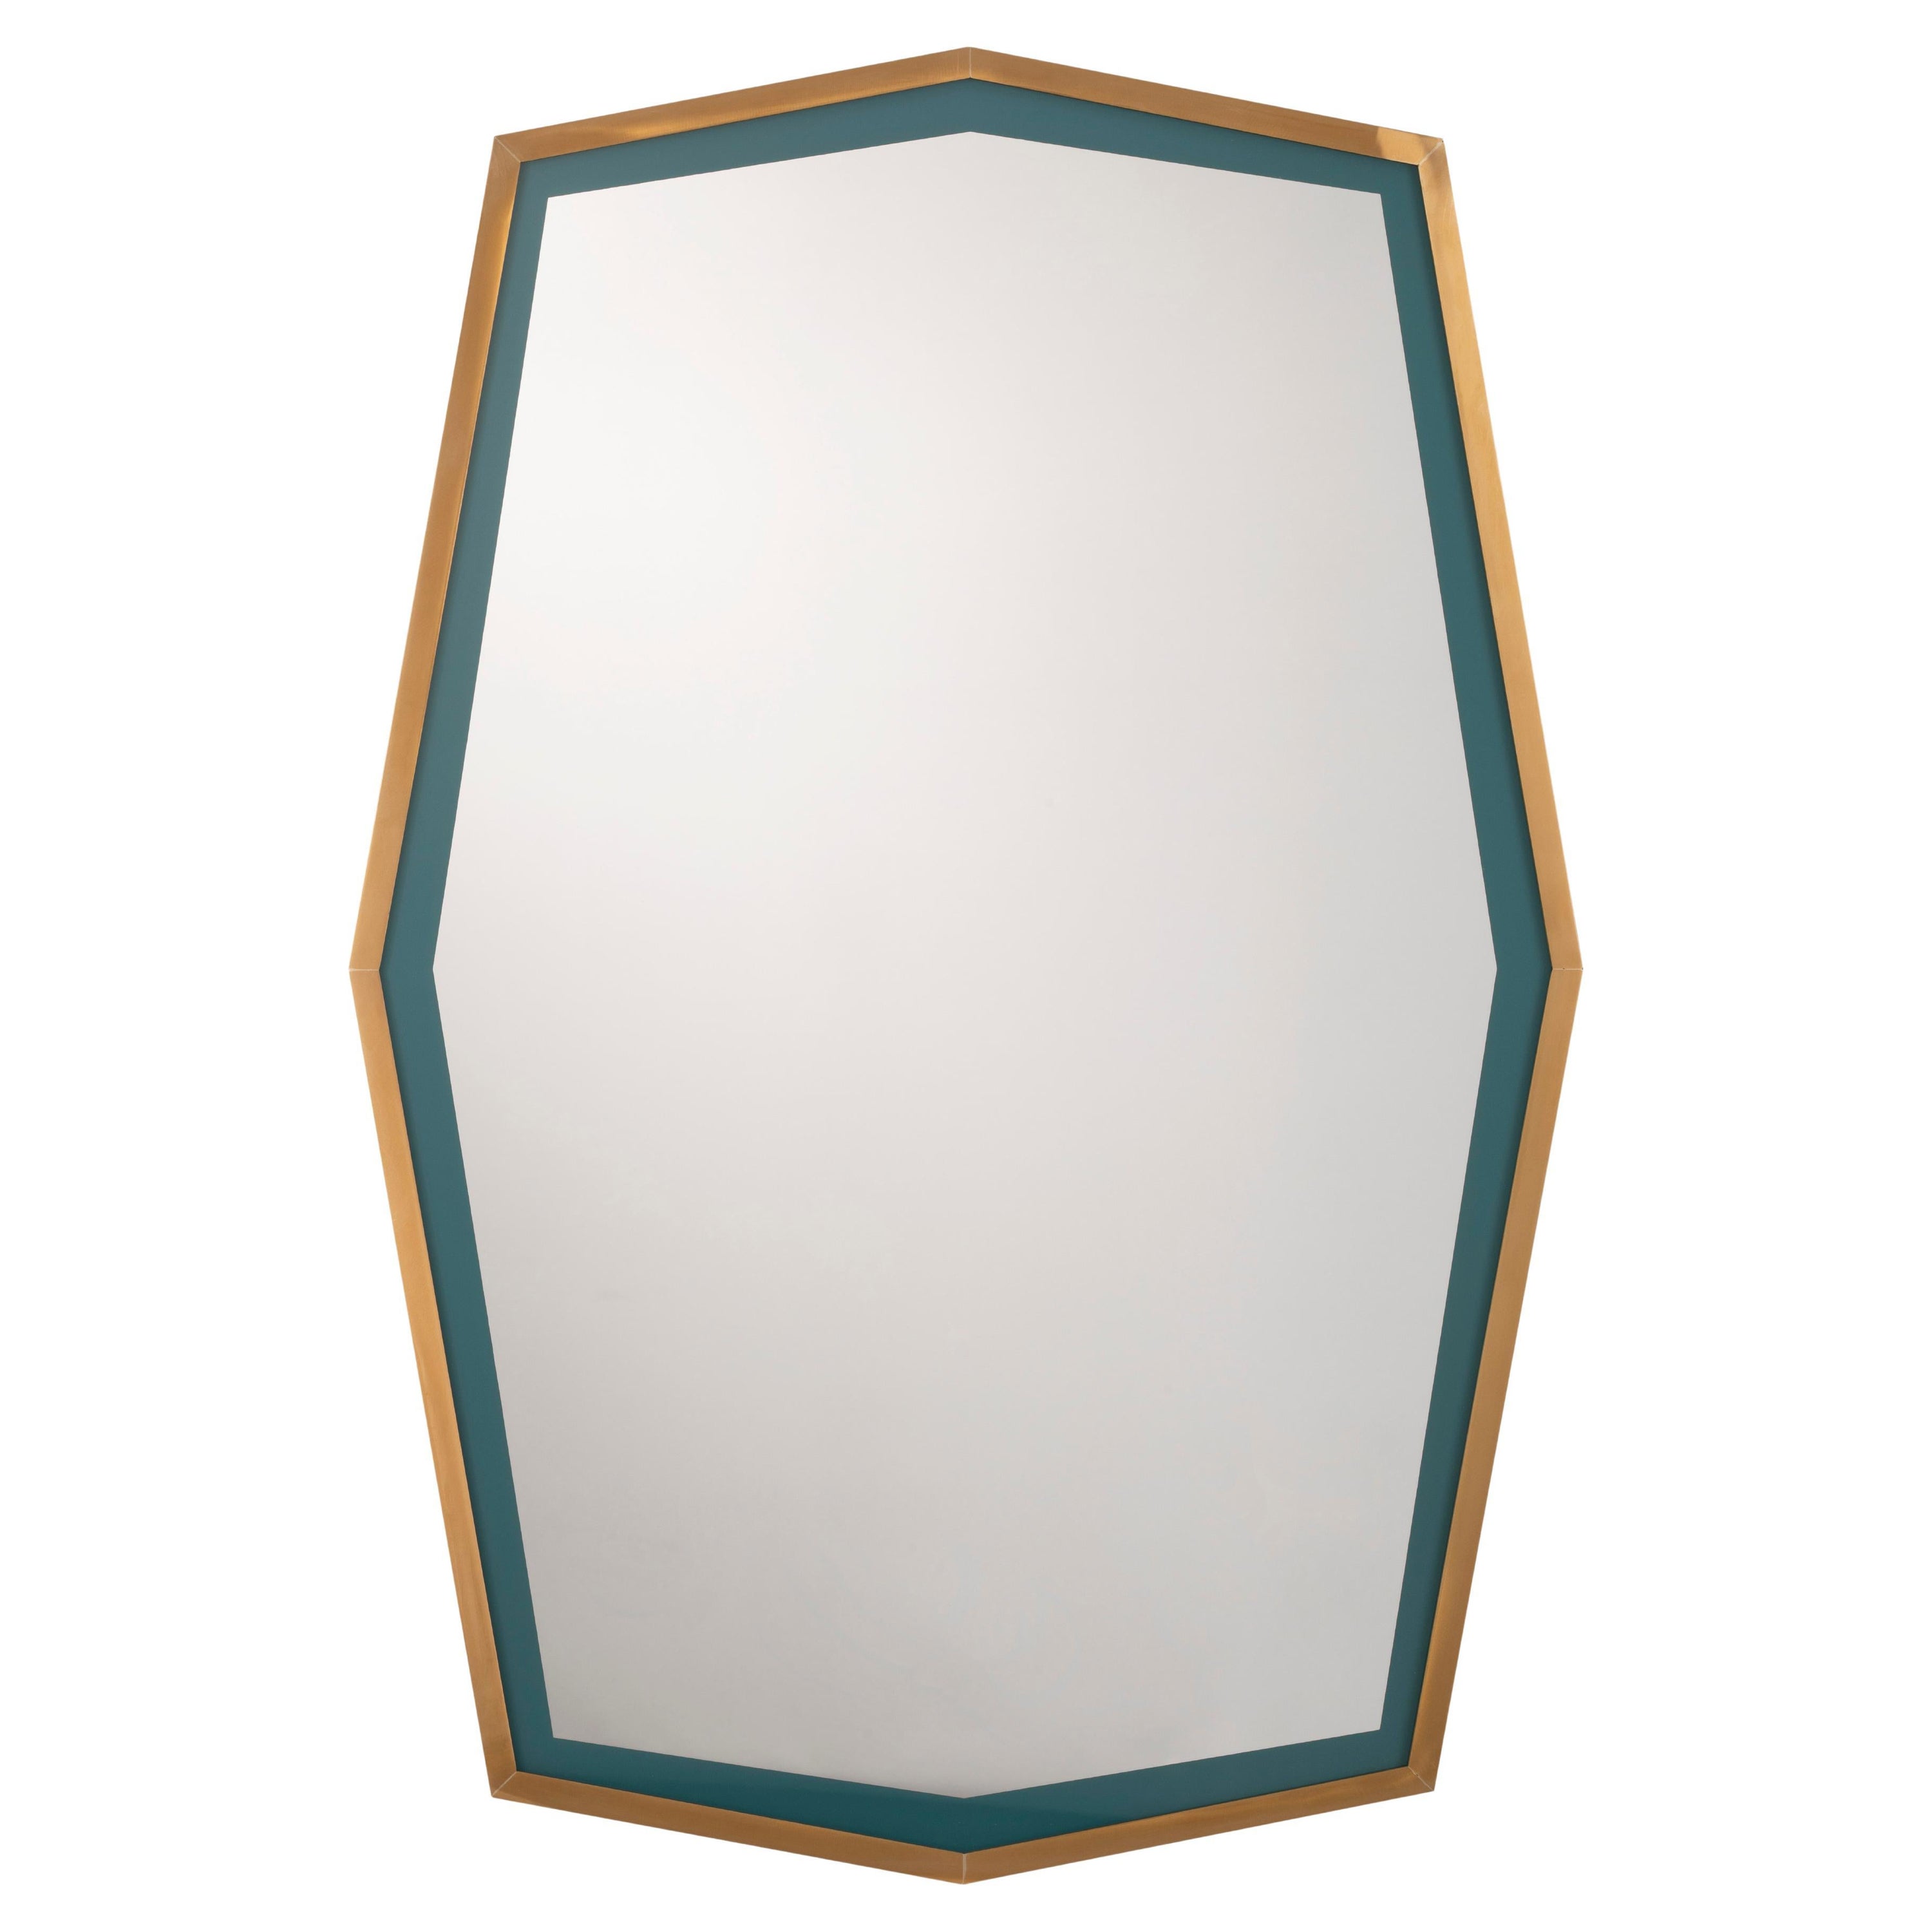 Novecento Double Frame Brass Mirror, Natural Finish For Sale